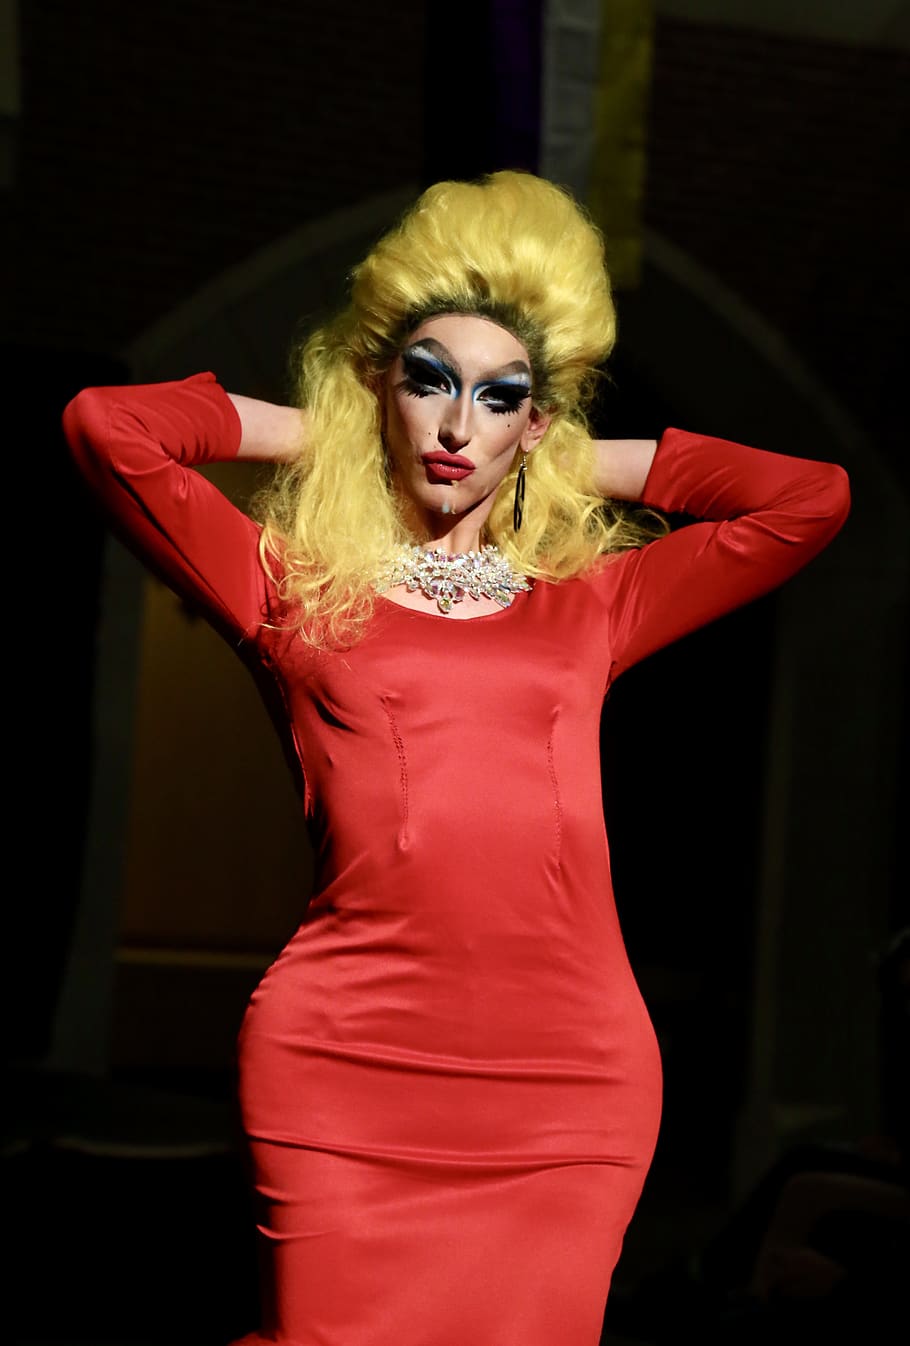 drag, queer, fashion, lgbtq, performance, red, one person, young adult, three quarter length, young women